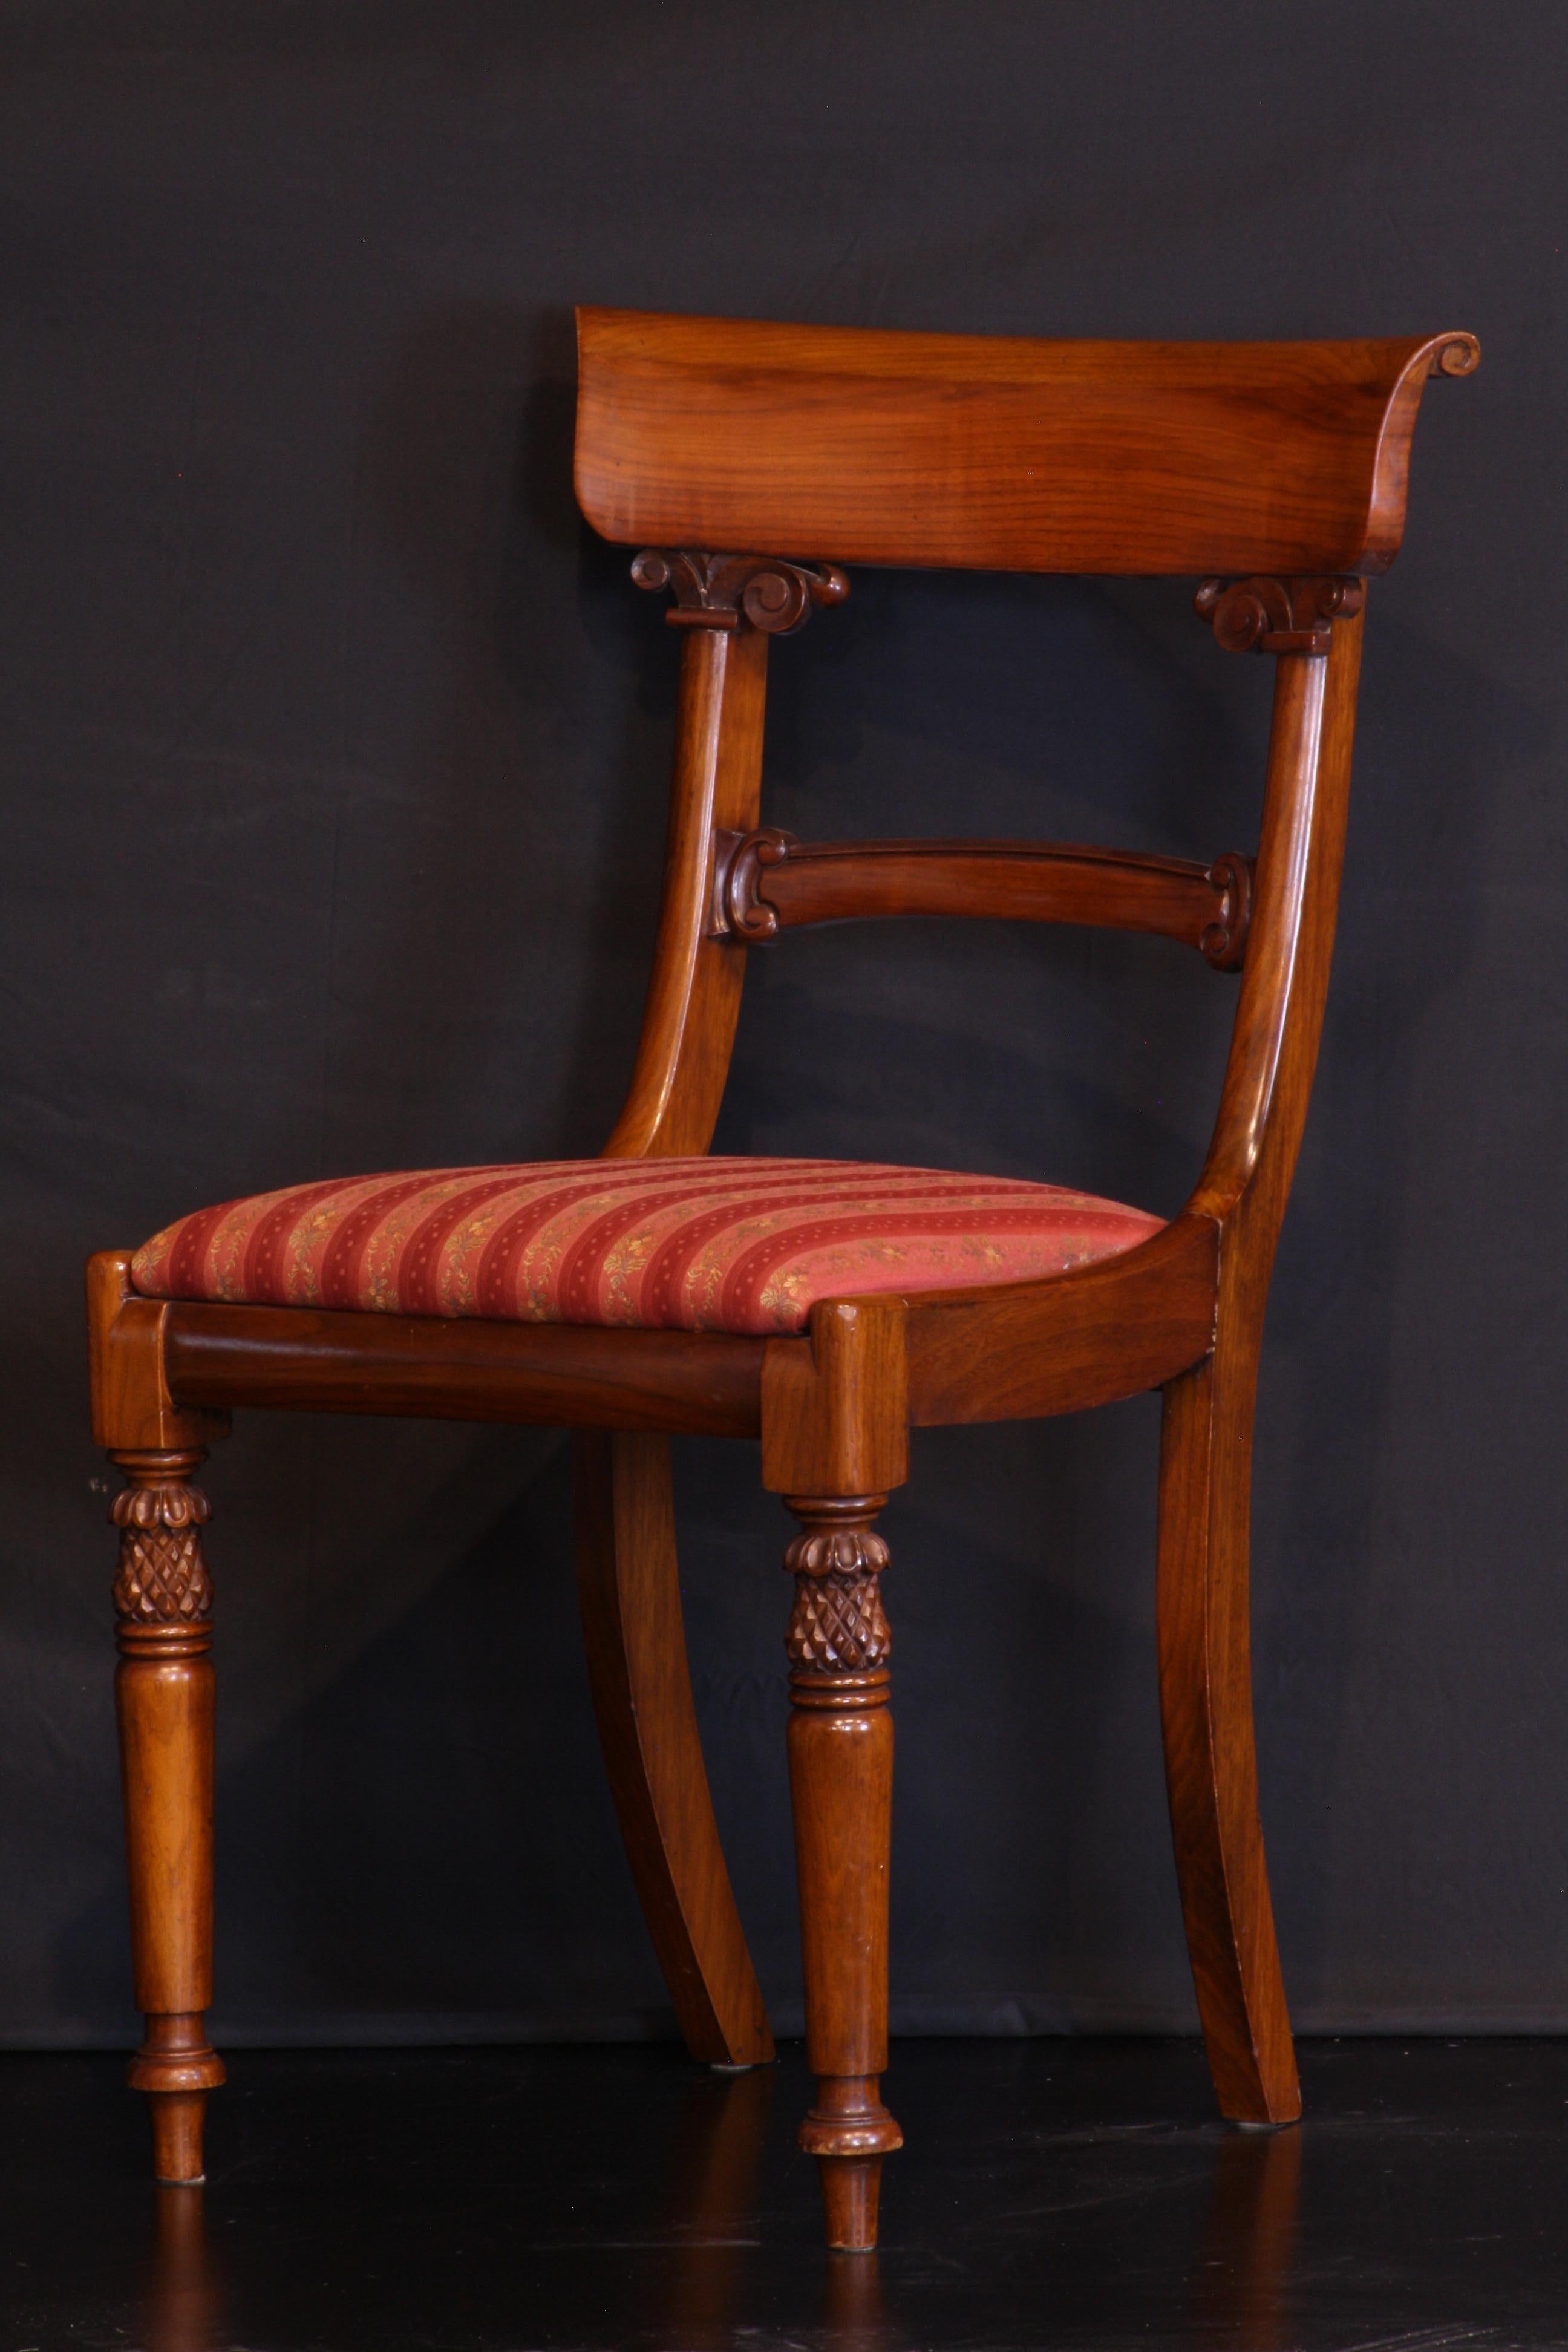 Dining chairs walnut 1 arm and 11 side chairs 19th century styling made by Lionel Rawlinson 
pop off seats so upholstery can be easily changed. Solid sturdy chairs.